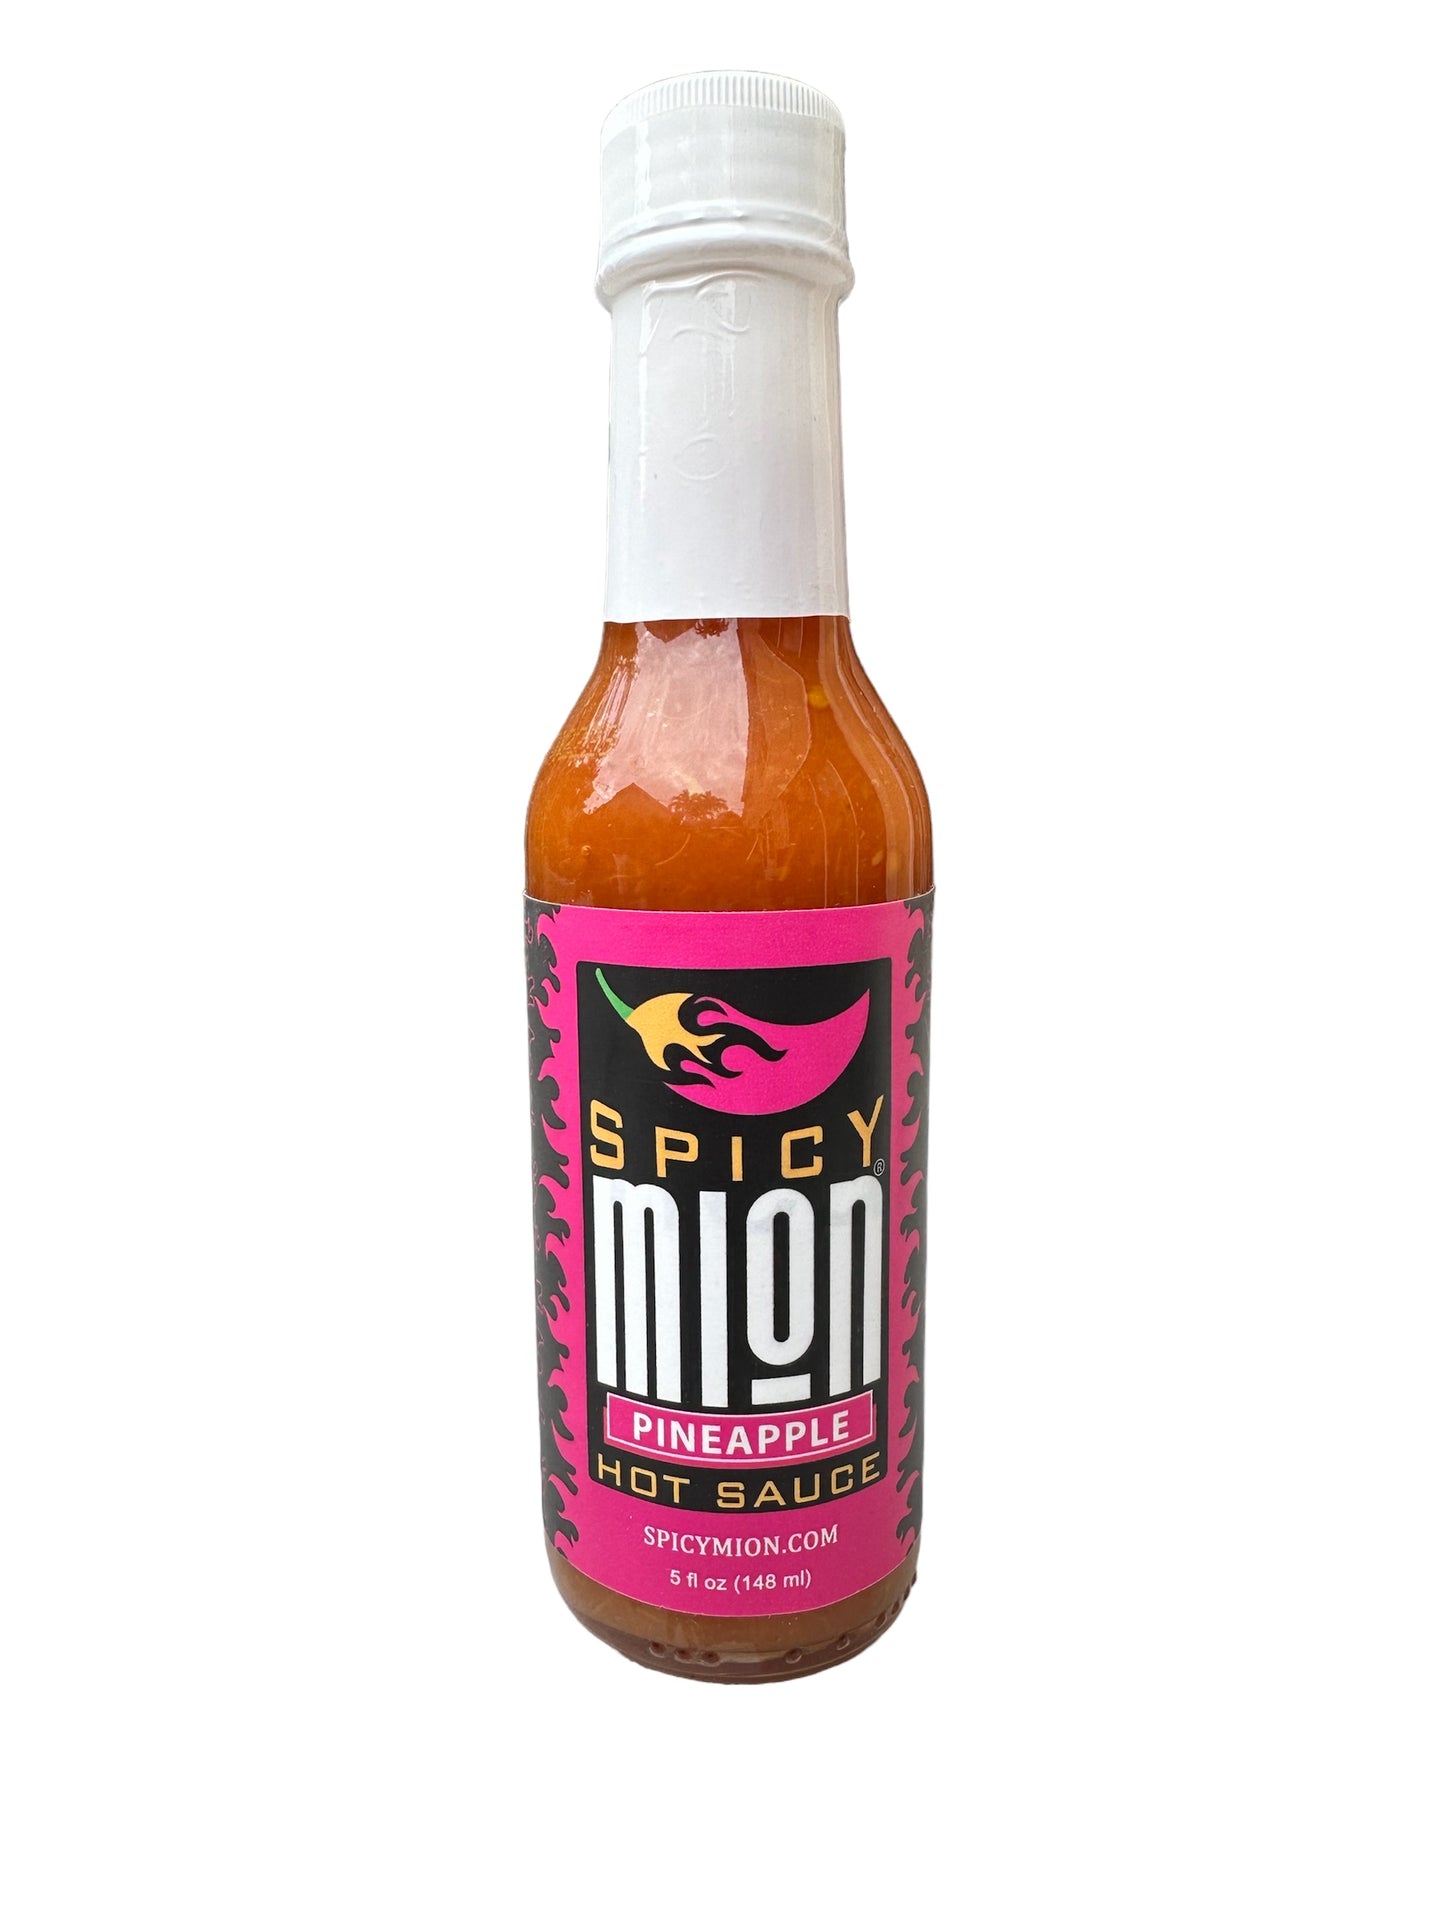 1 Spicy Mion PINEAPPLE Hot Sauce - 5 FL OZ